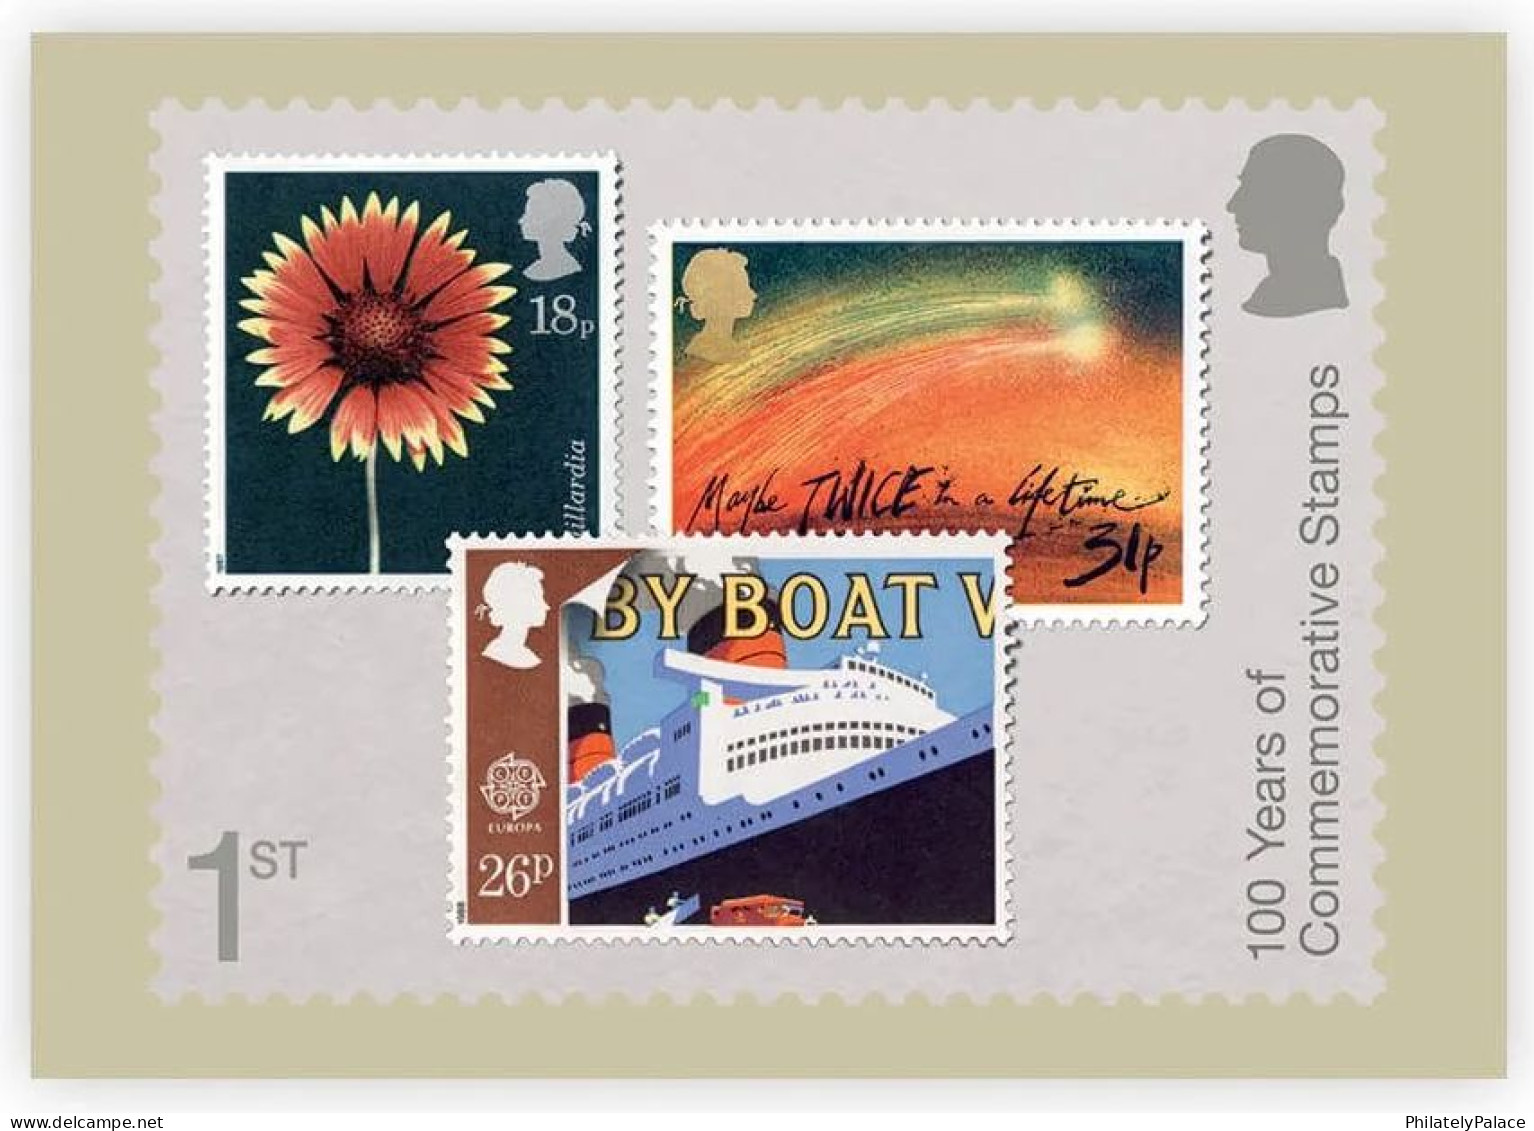 Great Britain (UK) New 2024 ,Stamp on Stamp, Lion,Queen,Butterfly,Flower,Music,Architecture, Set of 10, Postcards (**)